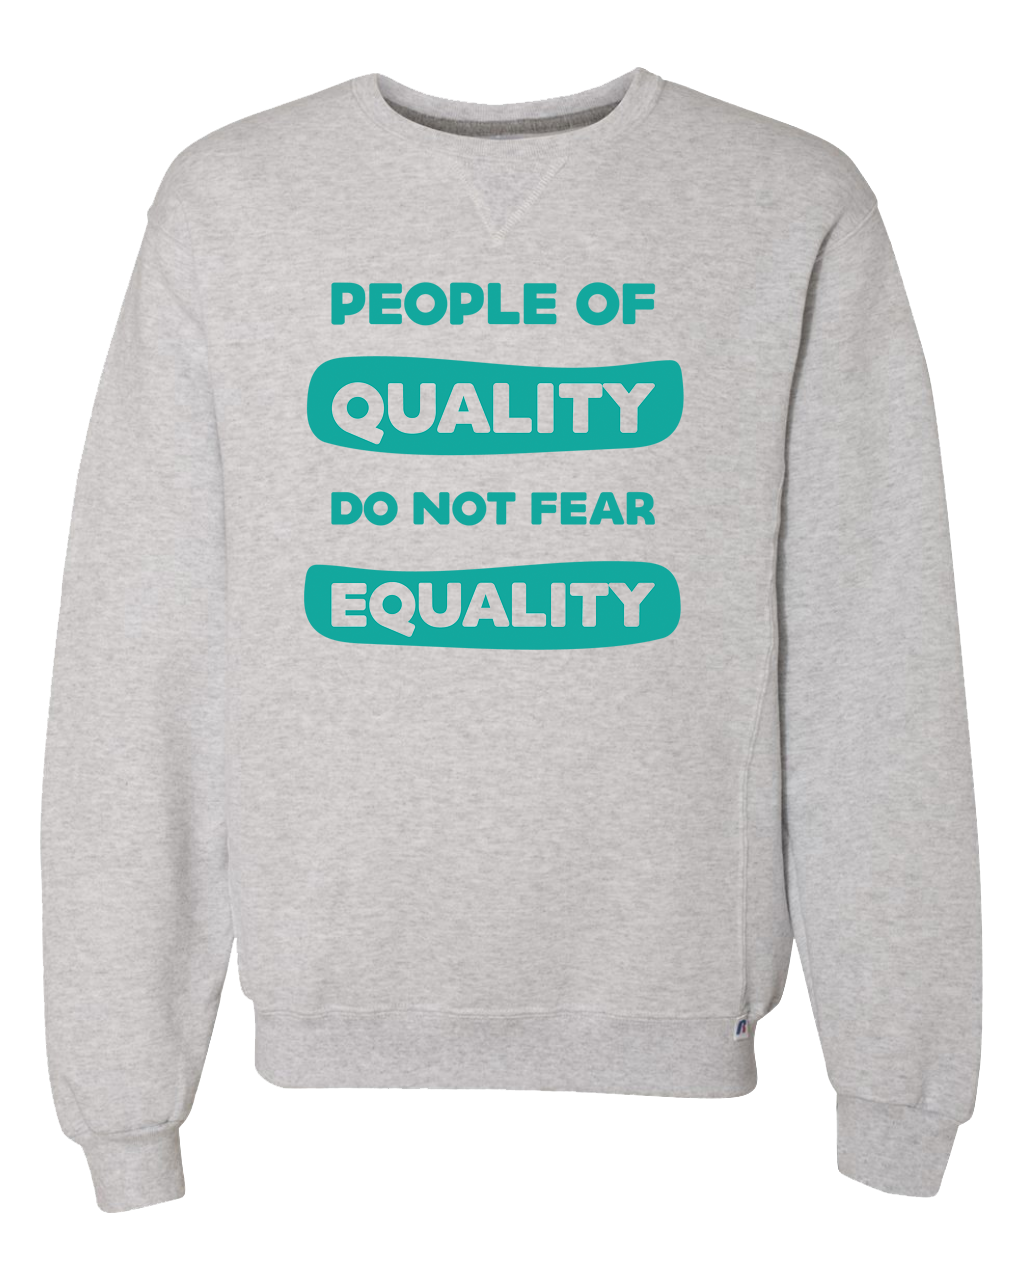 People of Quality Do Not Fear Equality Crewneck Sweatshirt